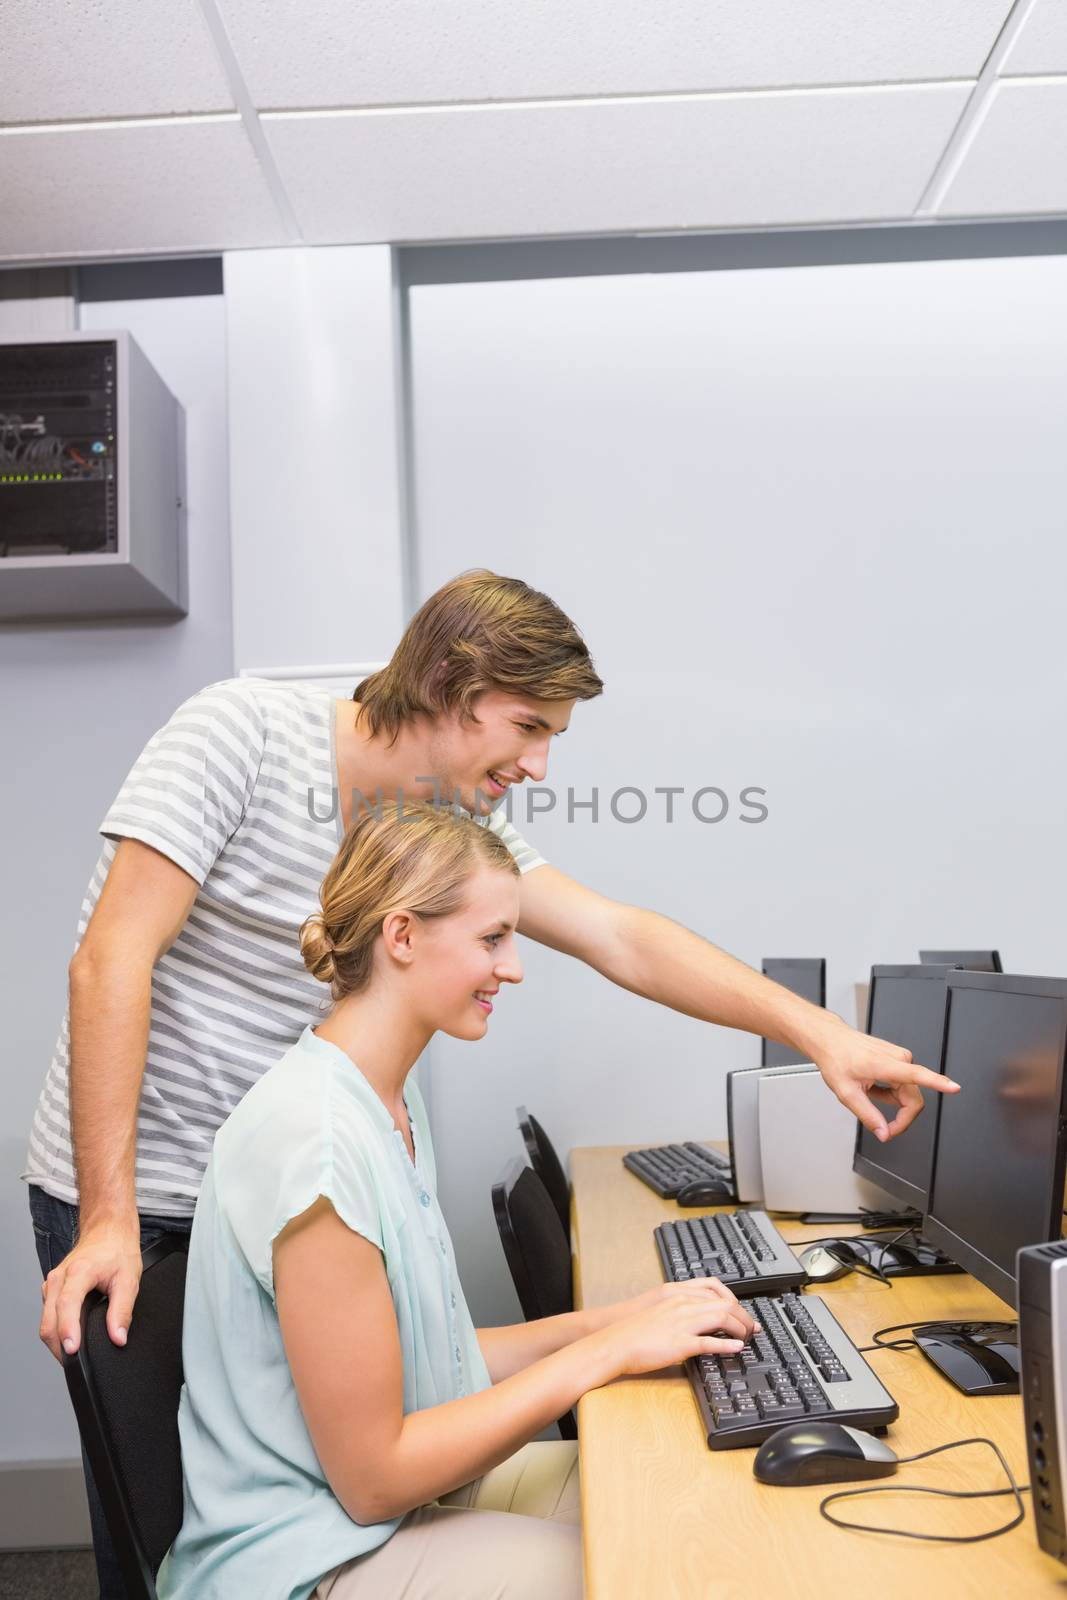 Students working on computer in classroom by Wavebreakmedia